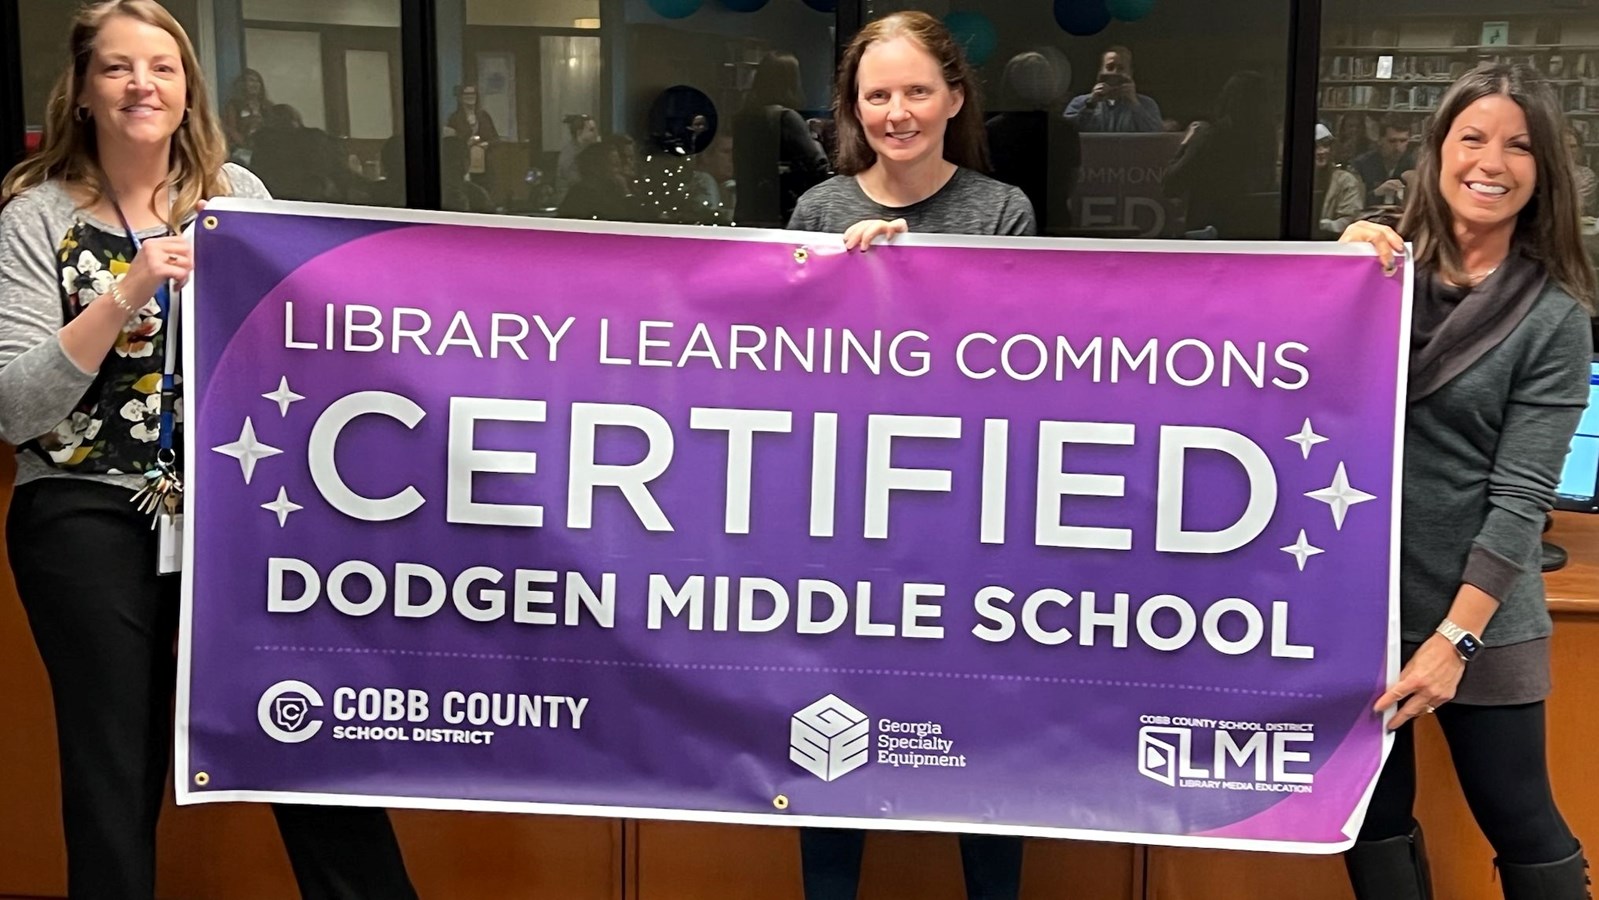 Dr. Alford, Ms. Bishop-Fink, and Ms. Cope hold the banner representing Dodgen's new status as a Library Learning Commons Certified School.